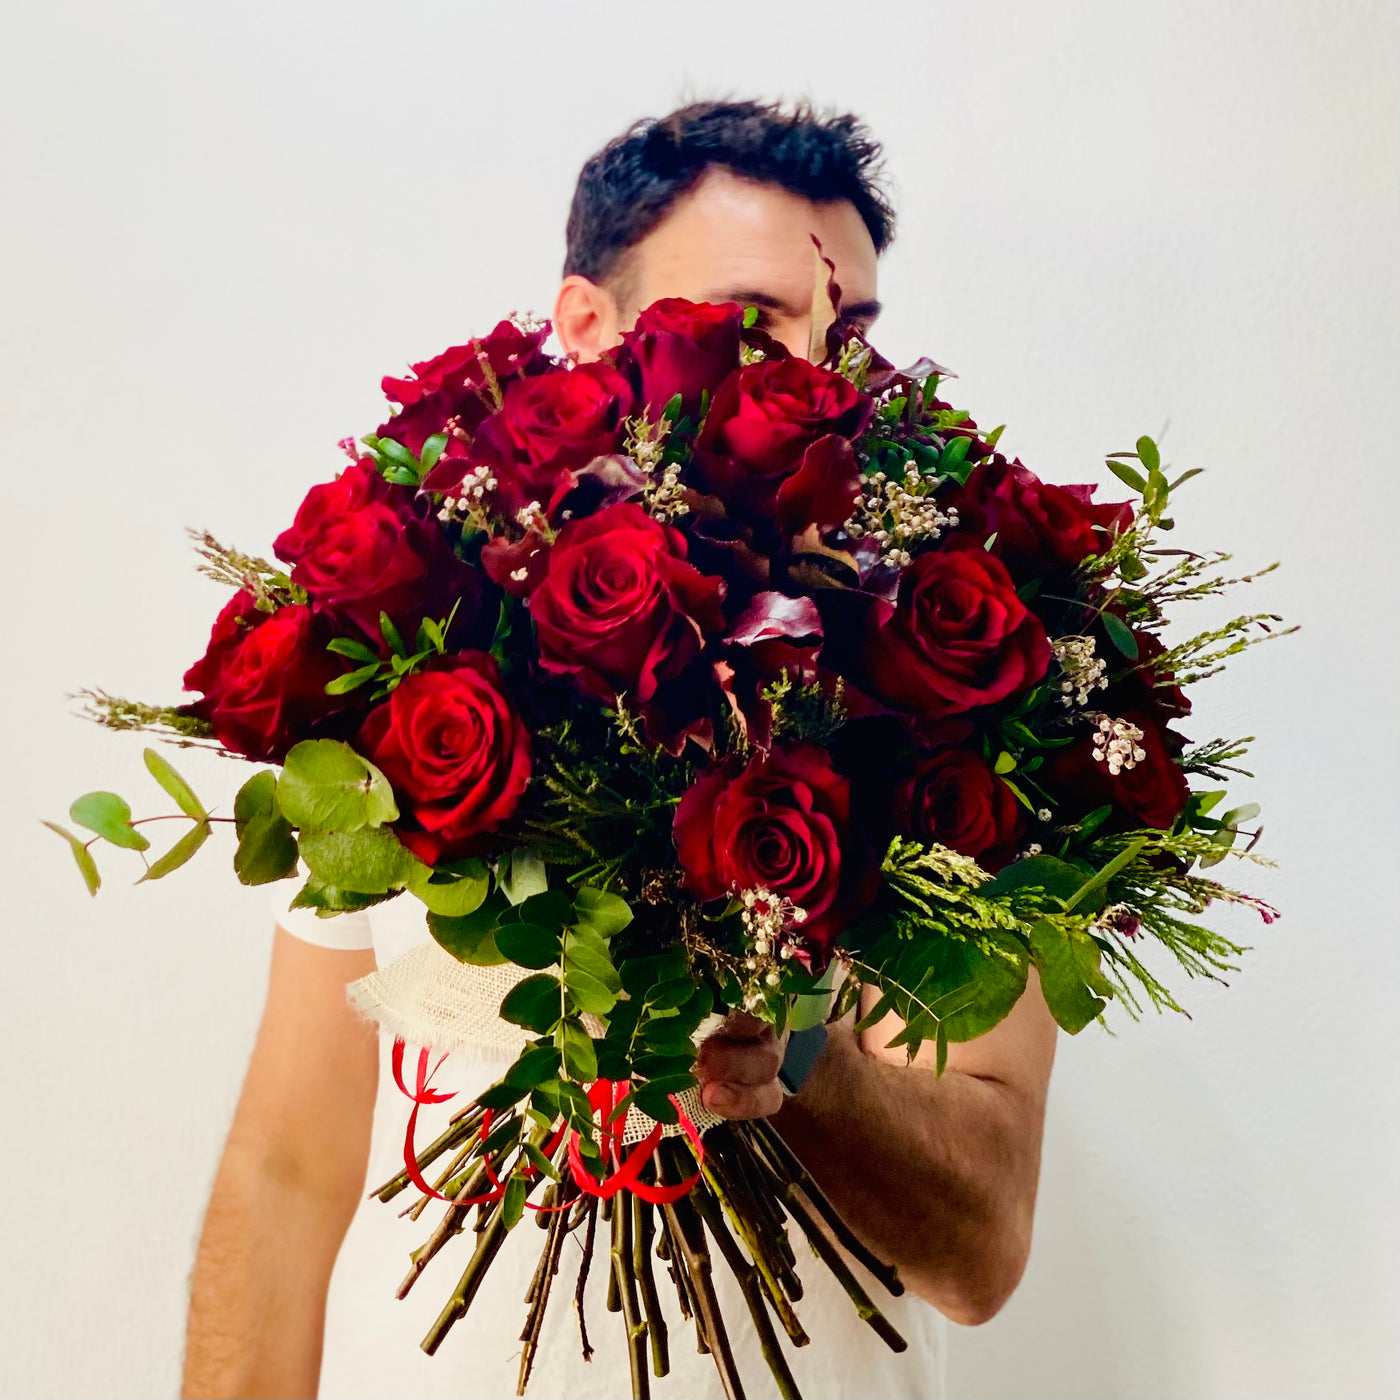 Big Rose | Giant Red Roses Bouquet